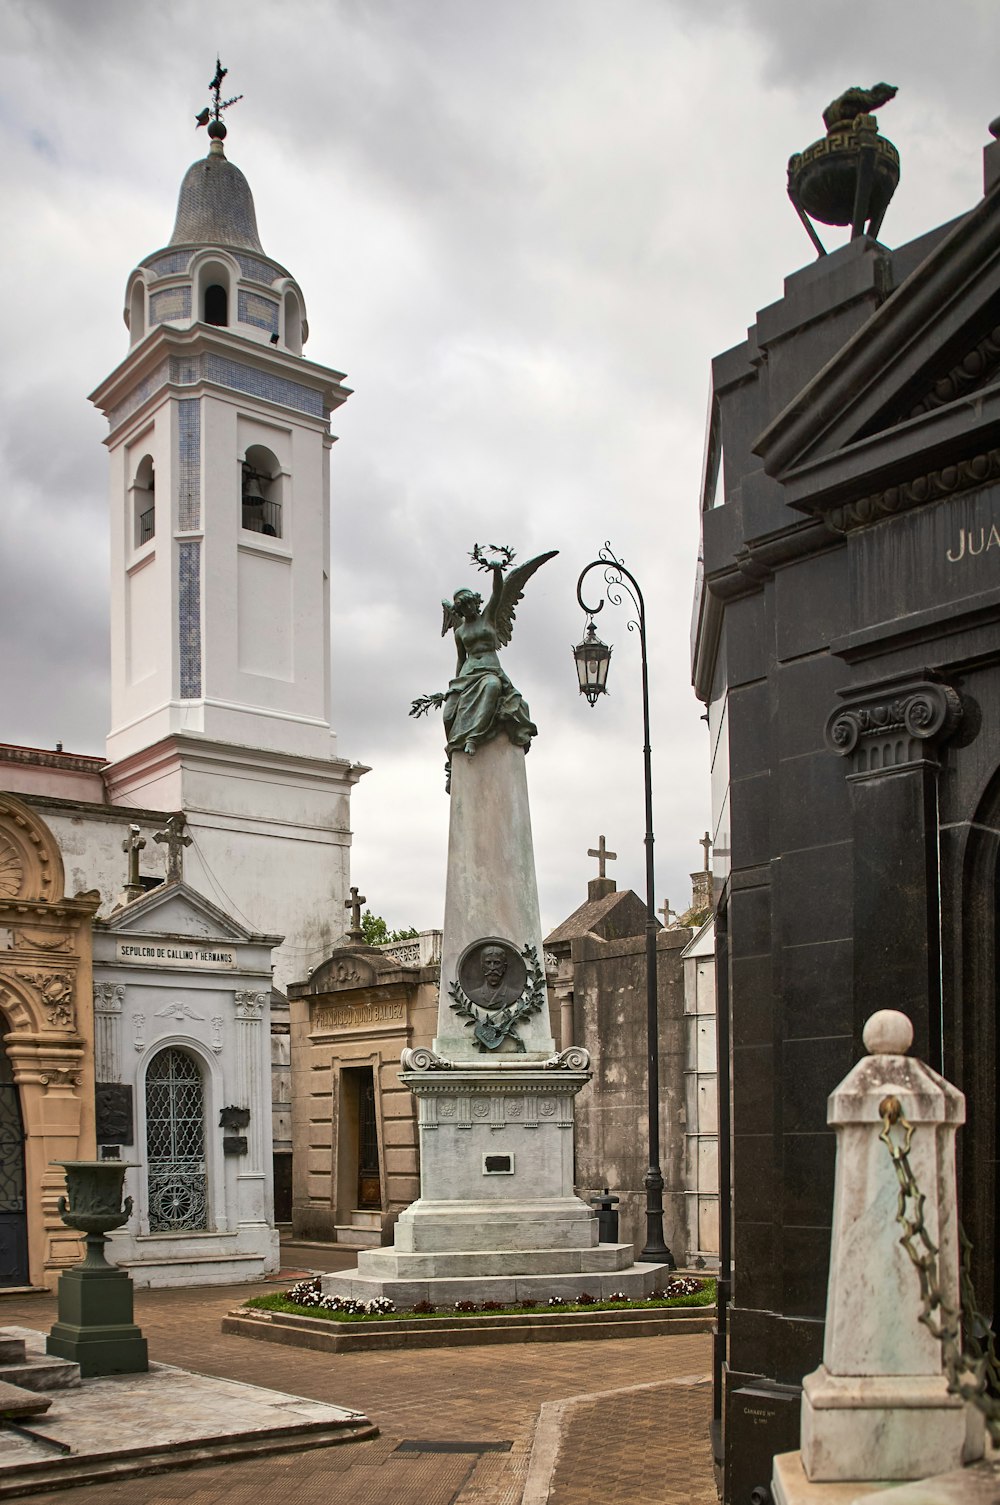 a cemetery with a statue and a clock tower in the background